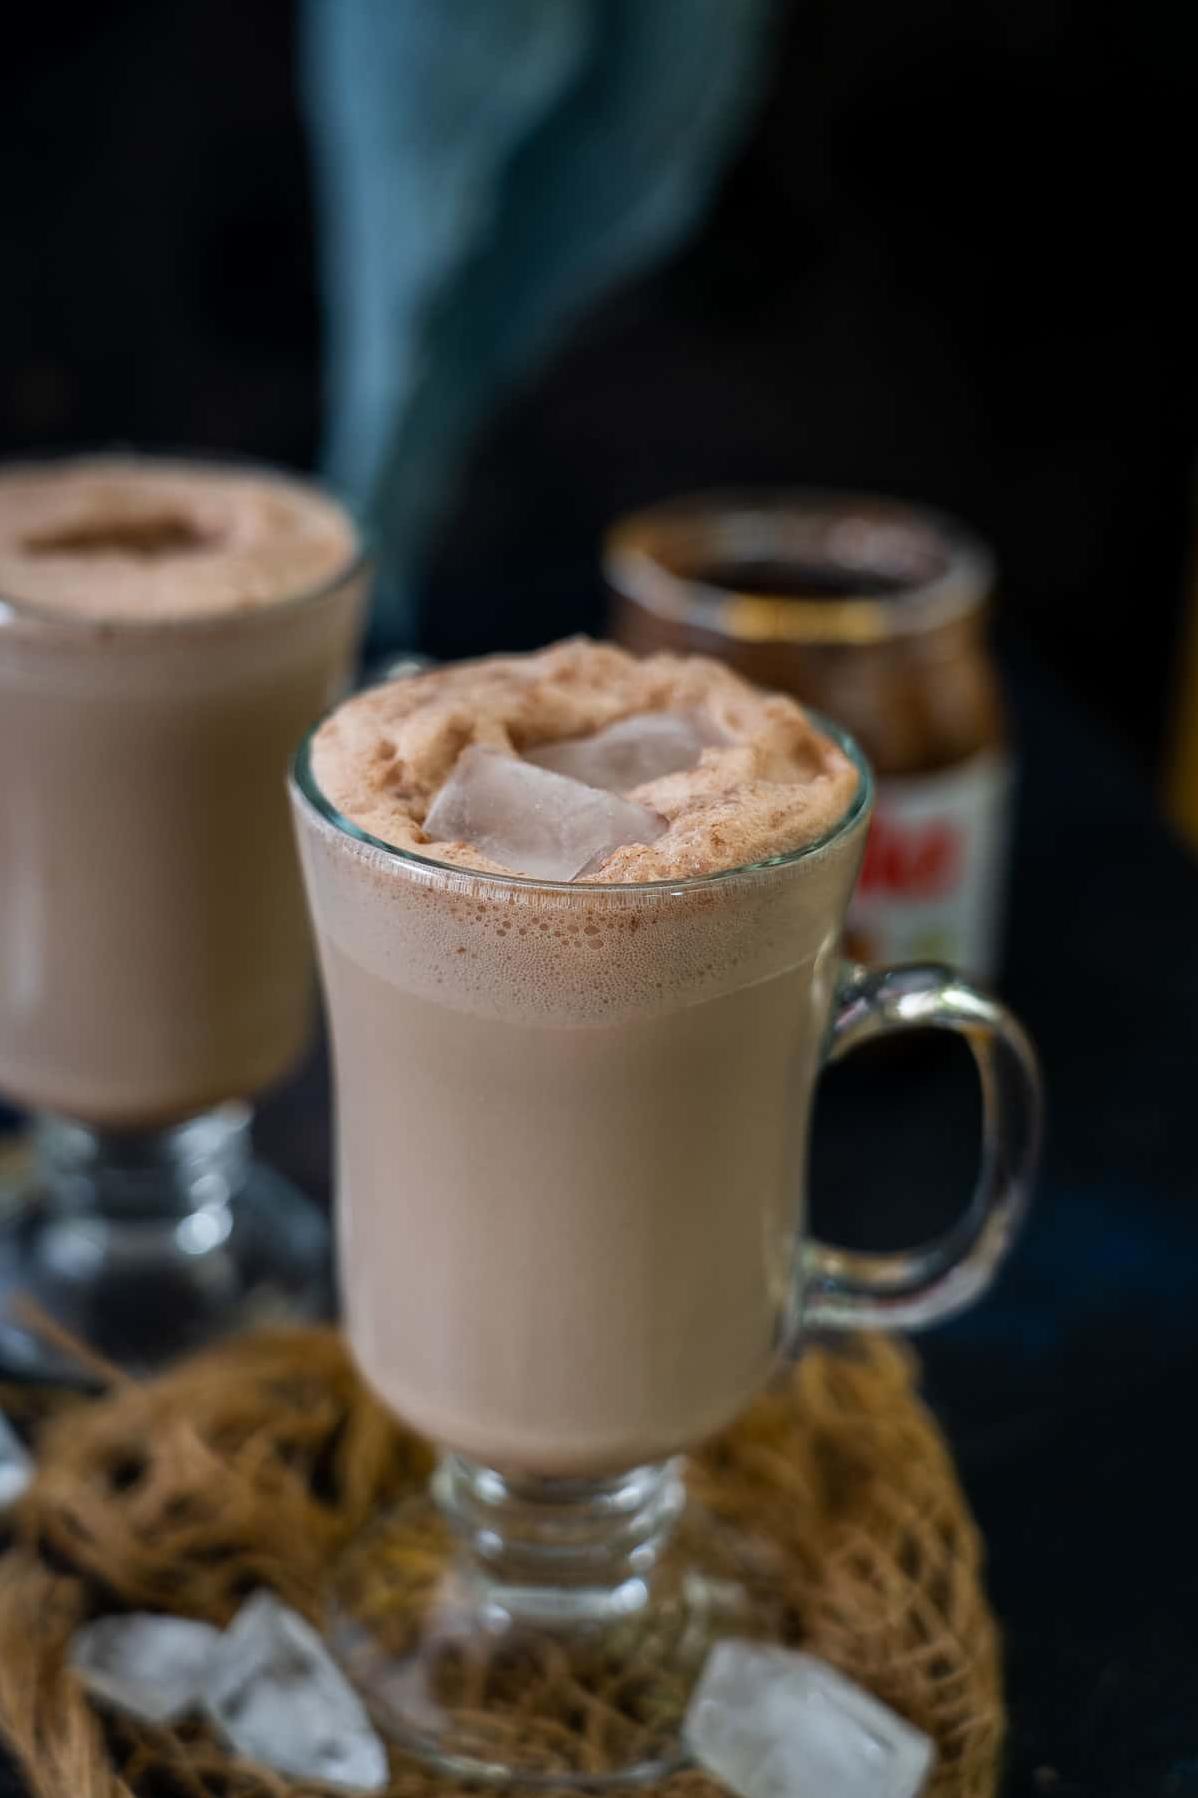  This Nutella coffee will give you the energy boost you need to tackle the day.